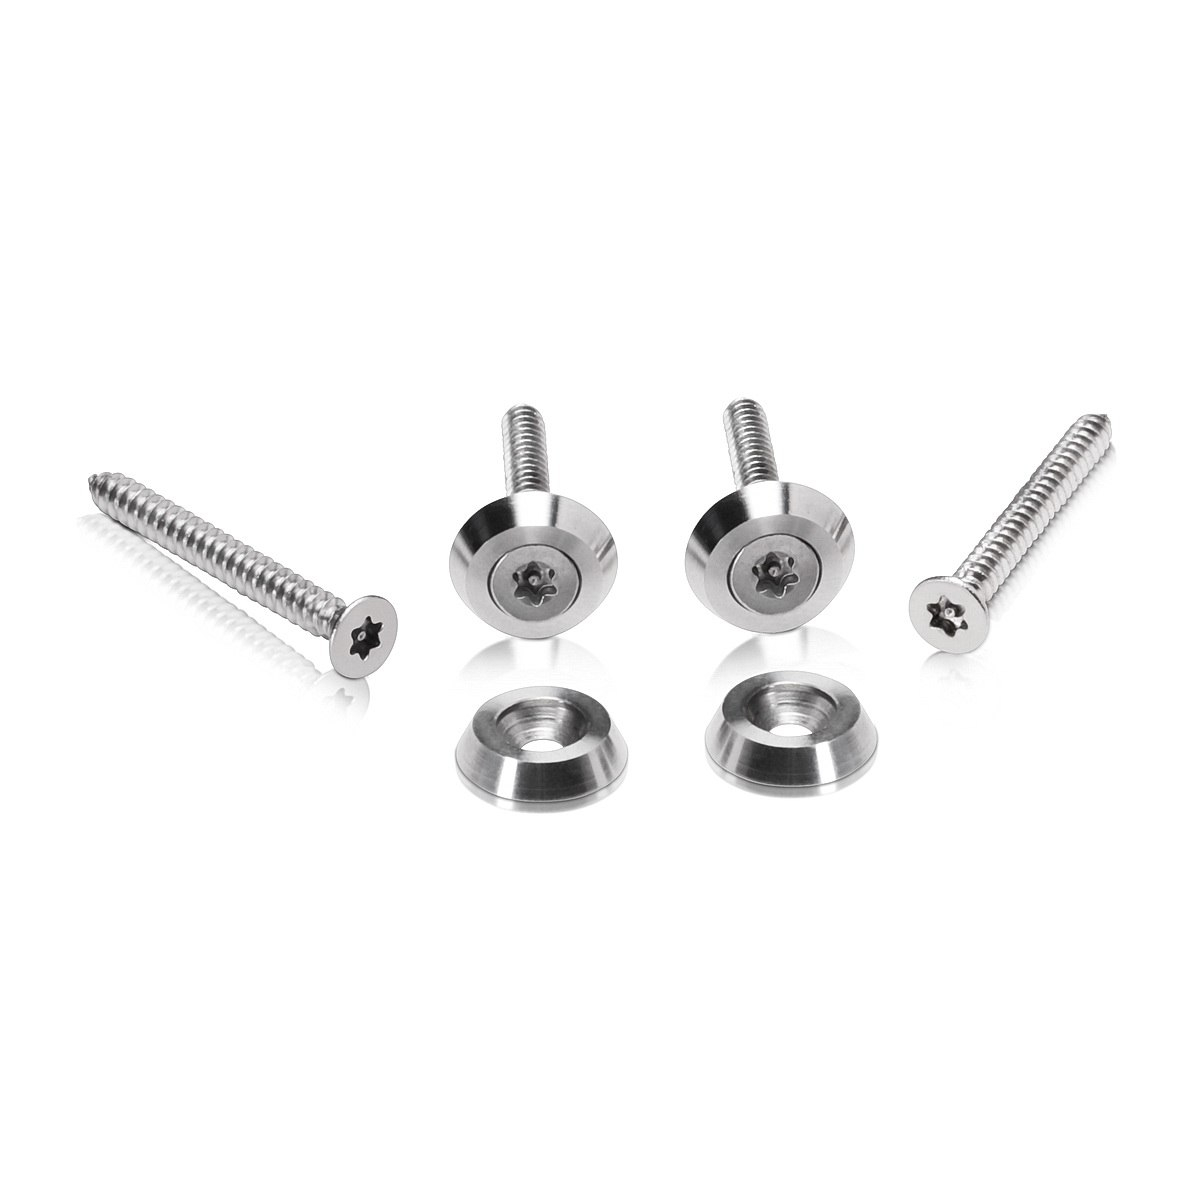 Set of 4 Stainless Steel Washer Diameter 5/8'', Stainless Steel (Indoor or Outdoor). with Stainless Steel Tamper Proof Screw #8 x 1 1/2''